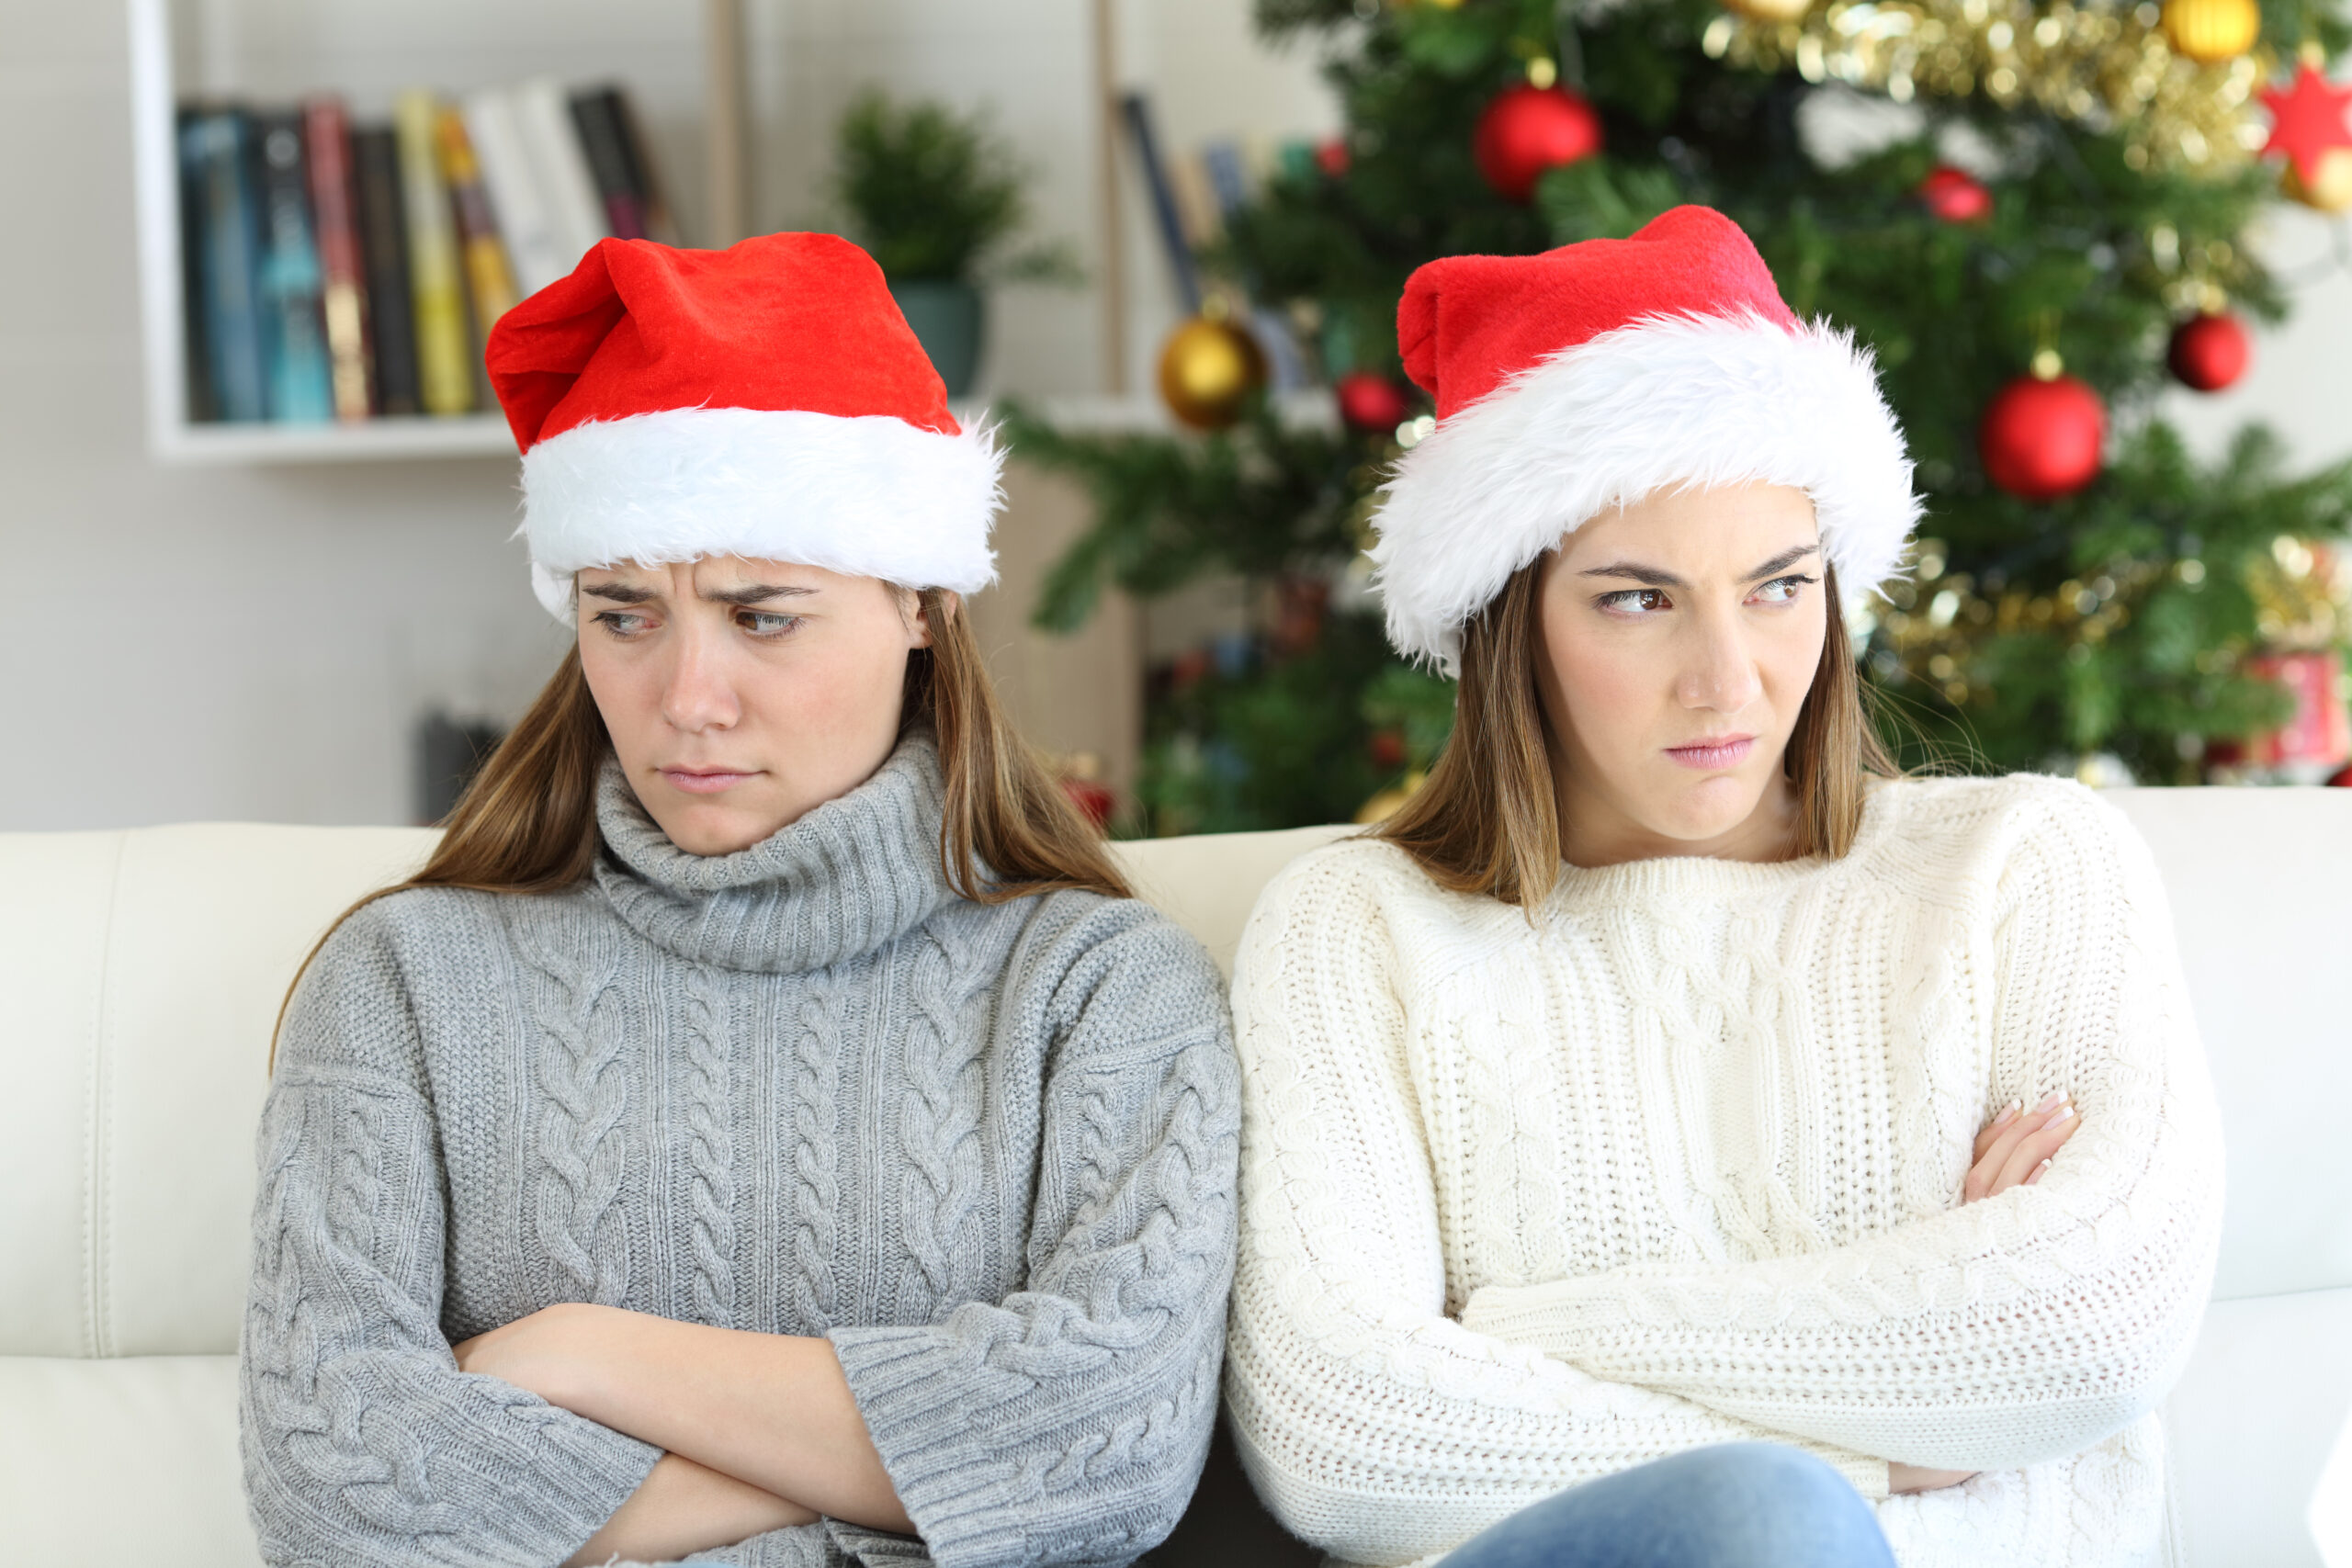 https://conflictinsights.co.uk/2021/12/top-5-tips-for-conflict-in-the-festive-season/